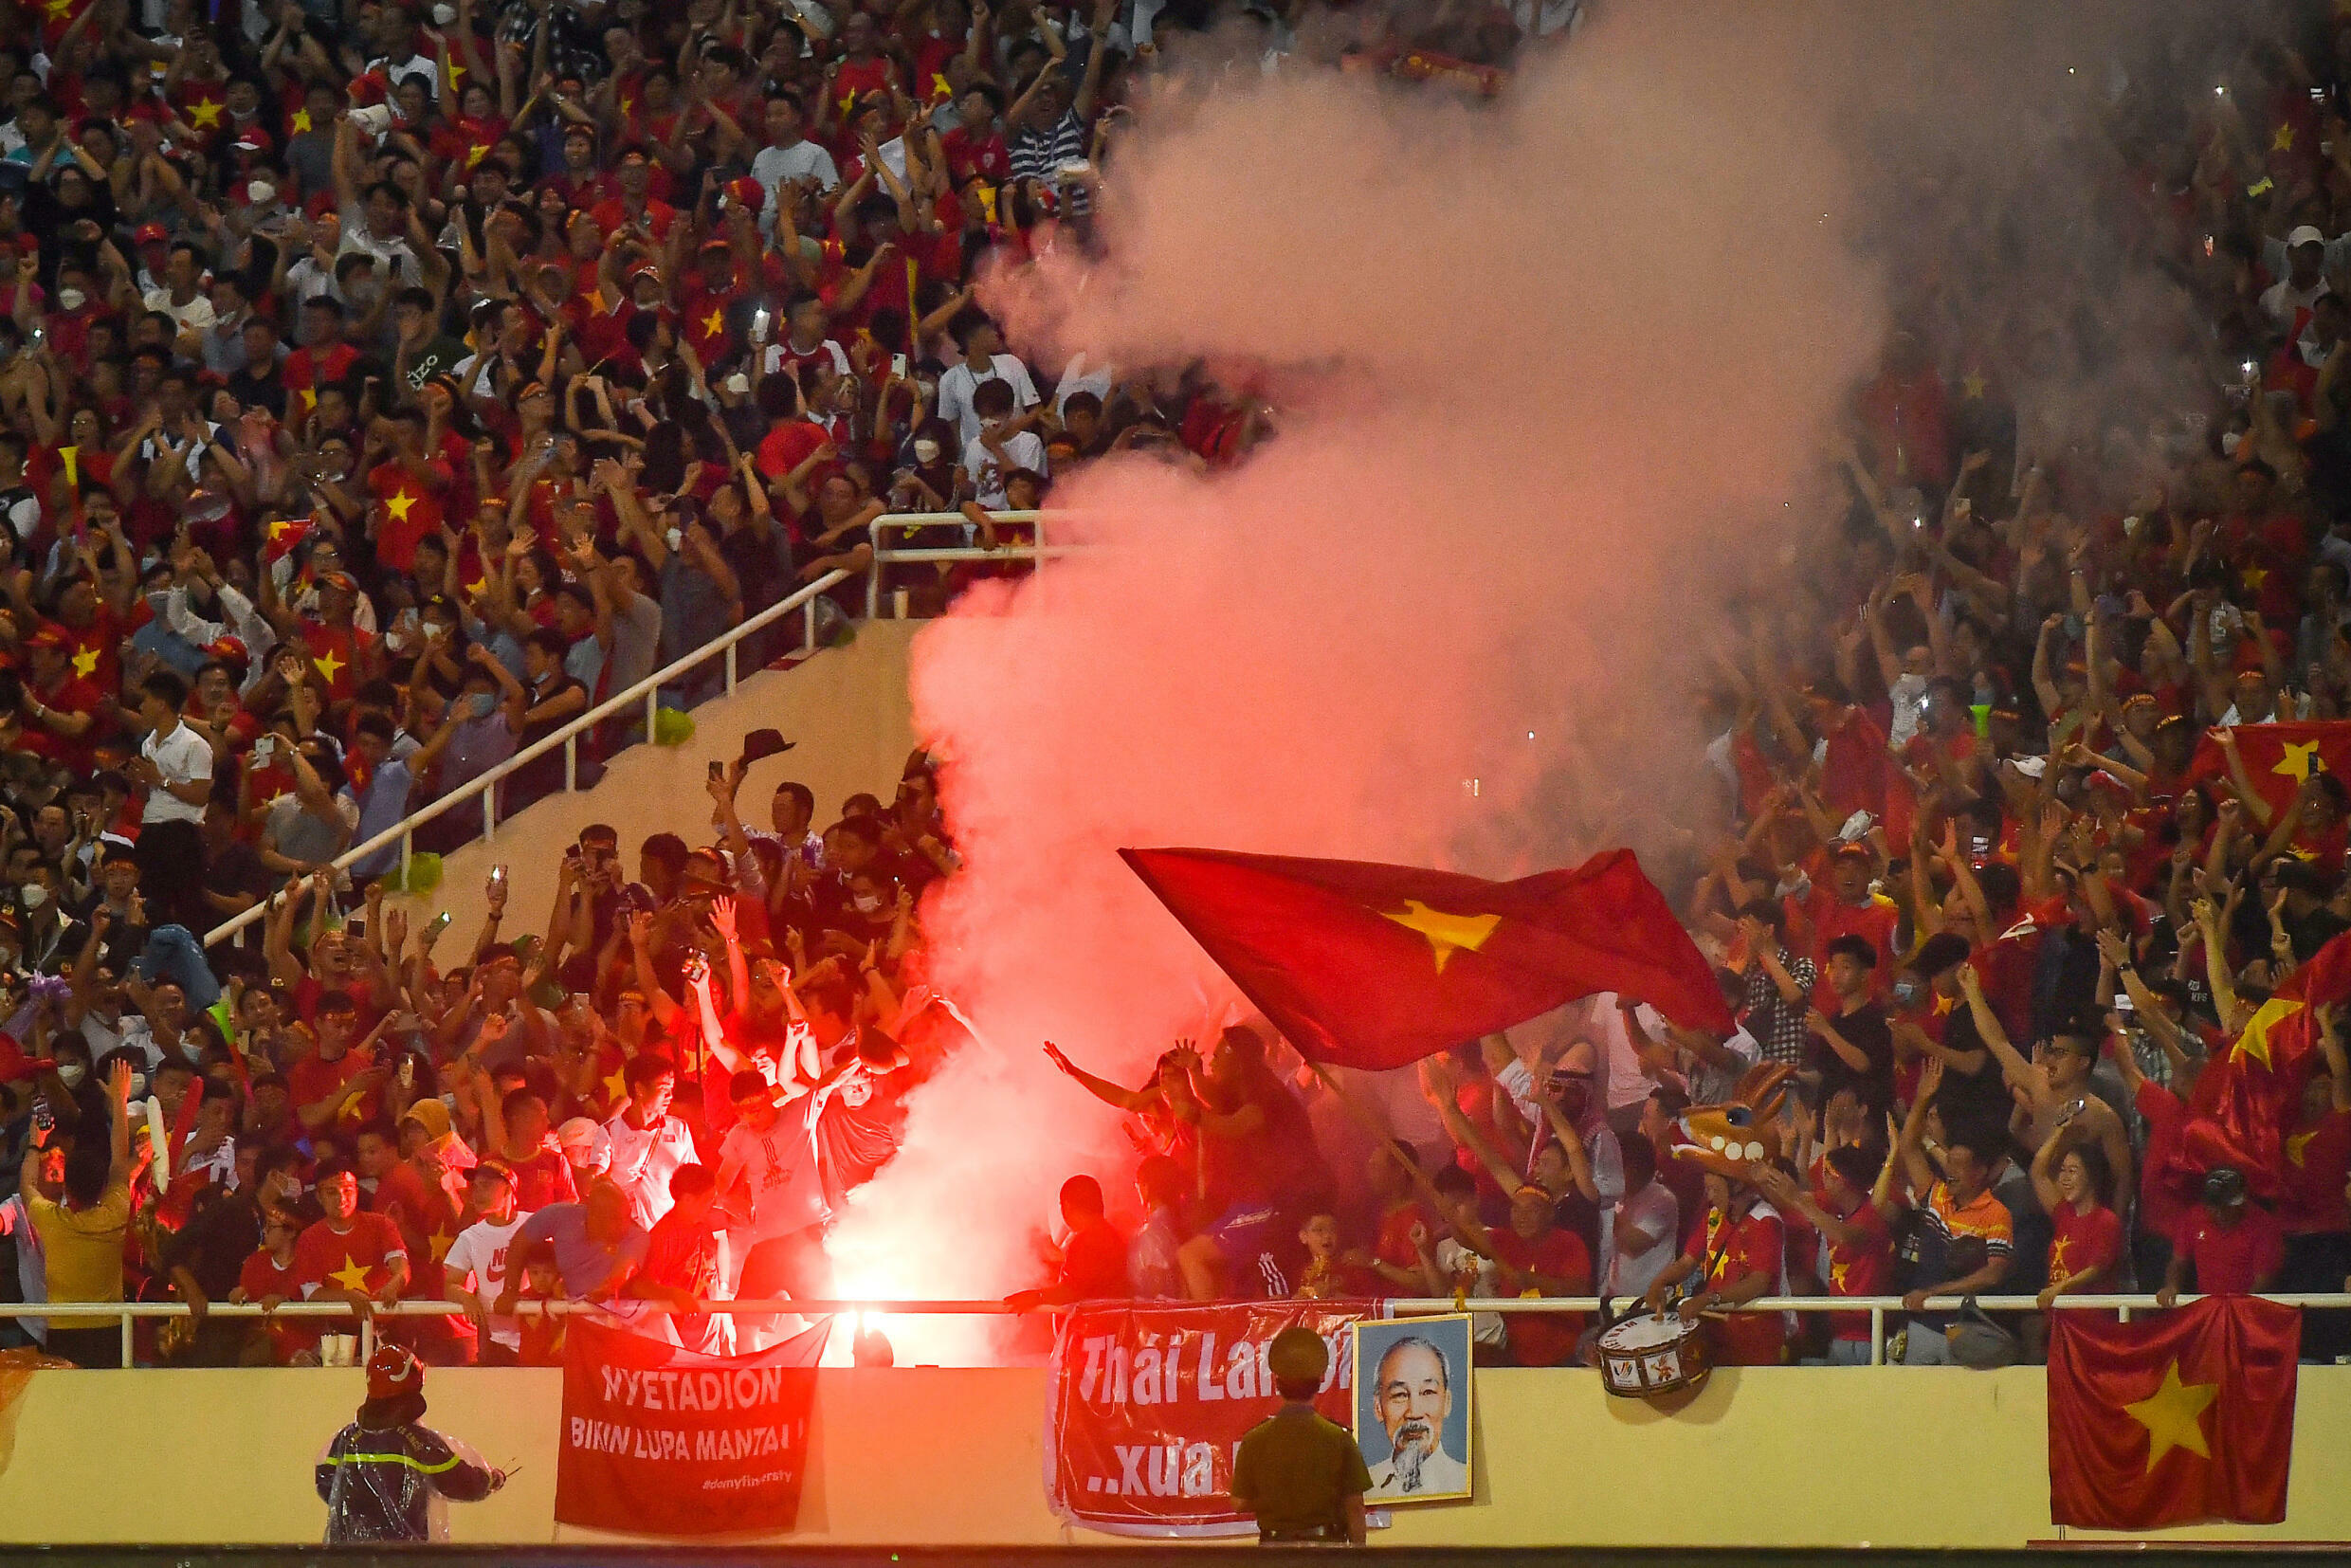 Vietnam erupts in celebration as SEA Games hosts win football gold